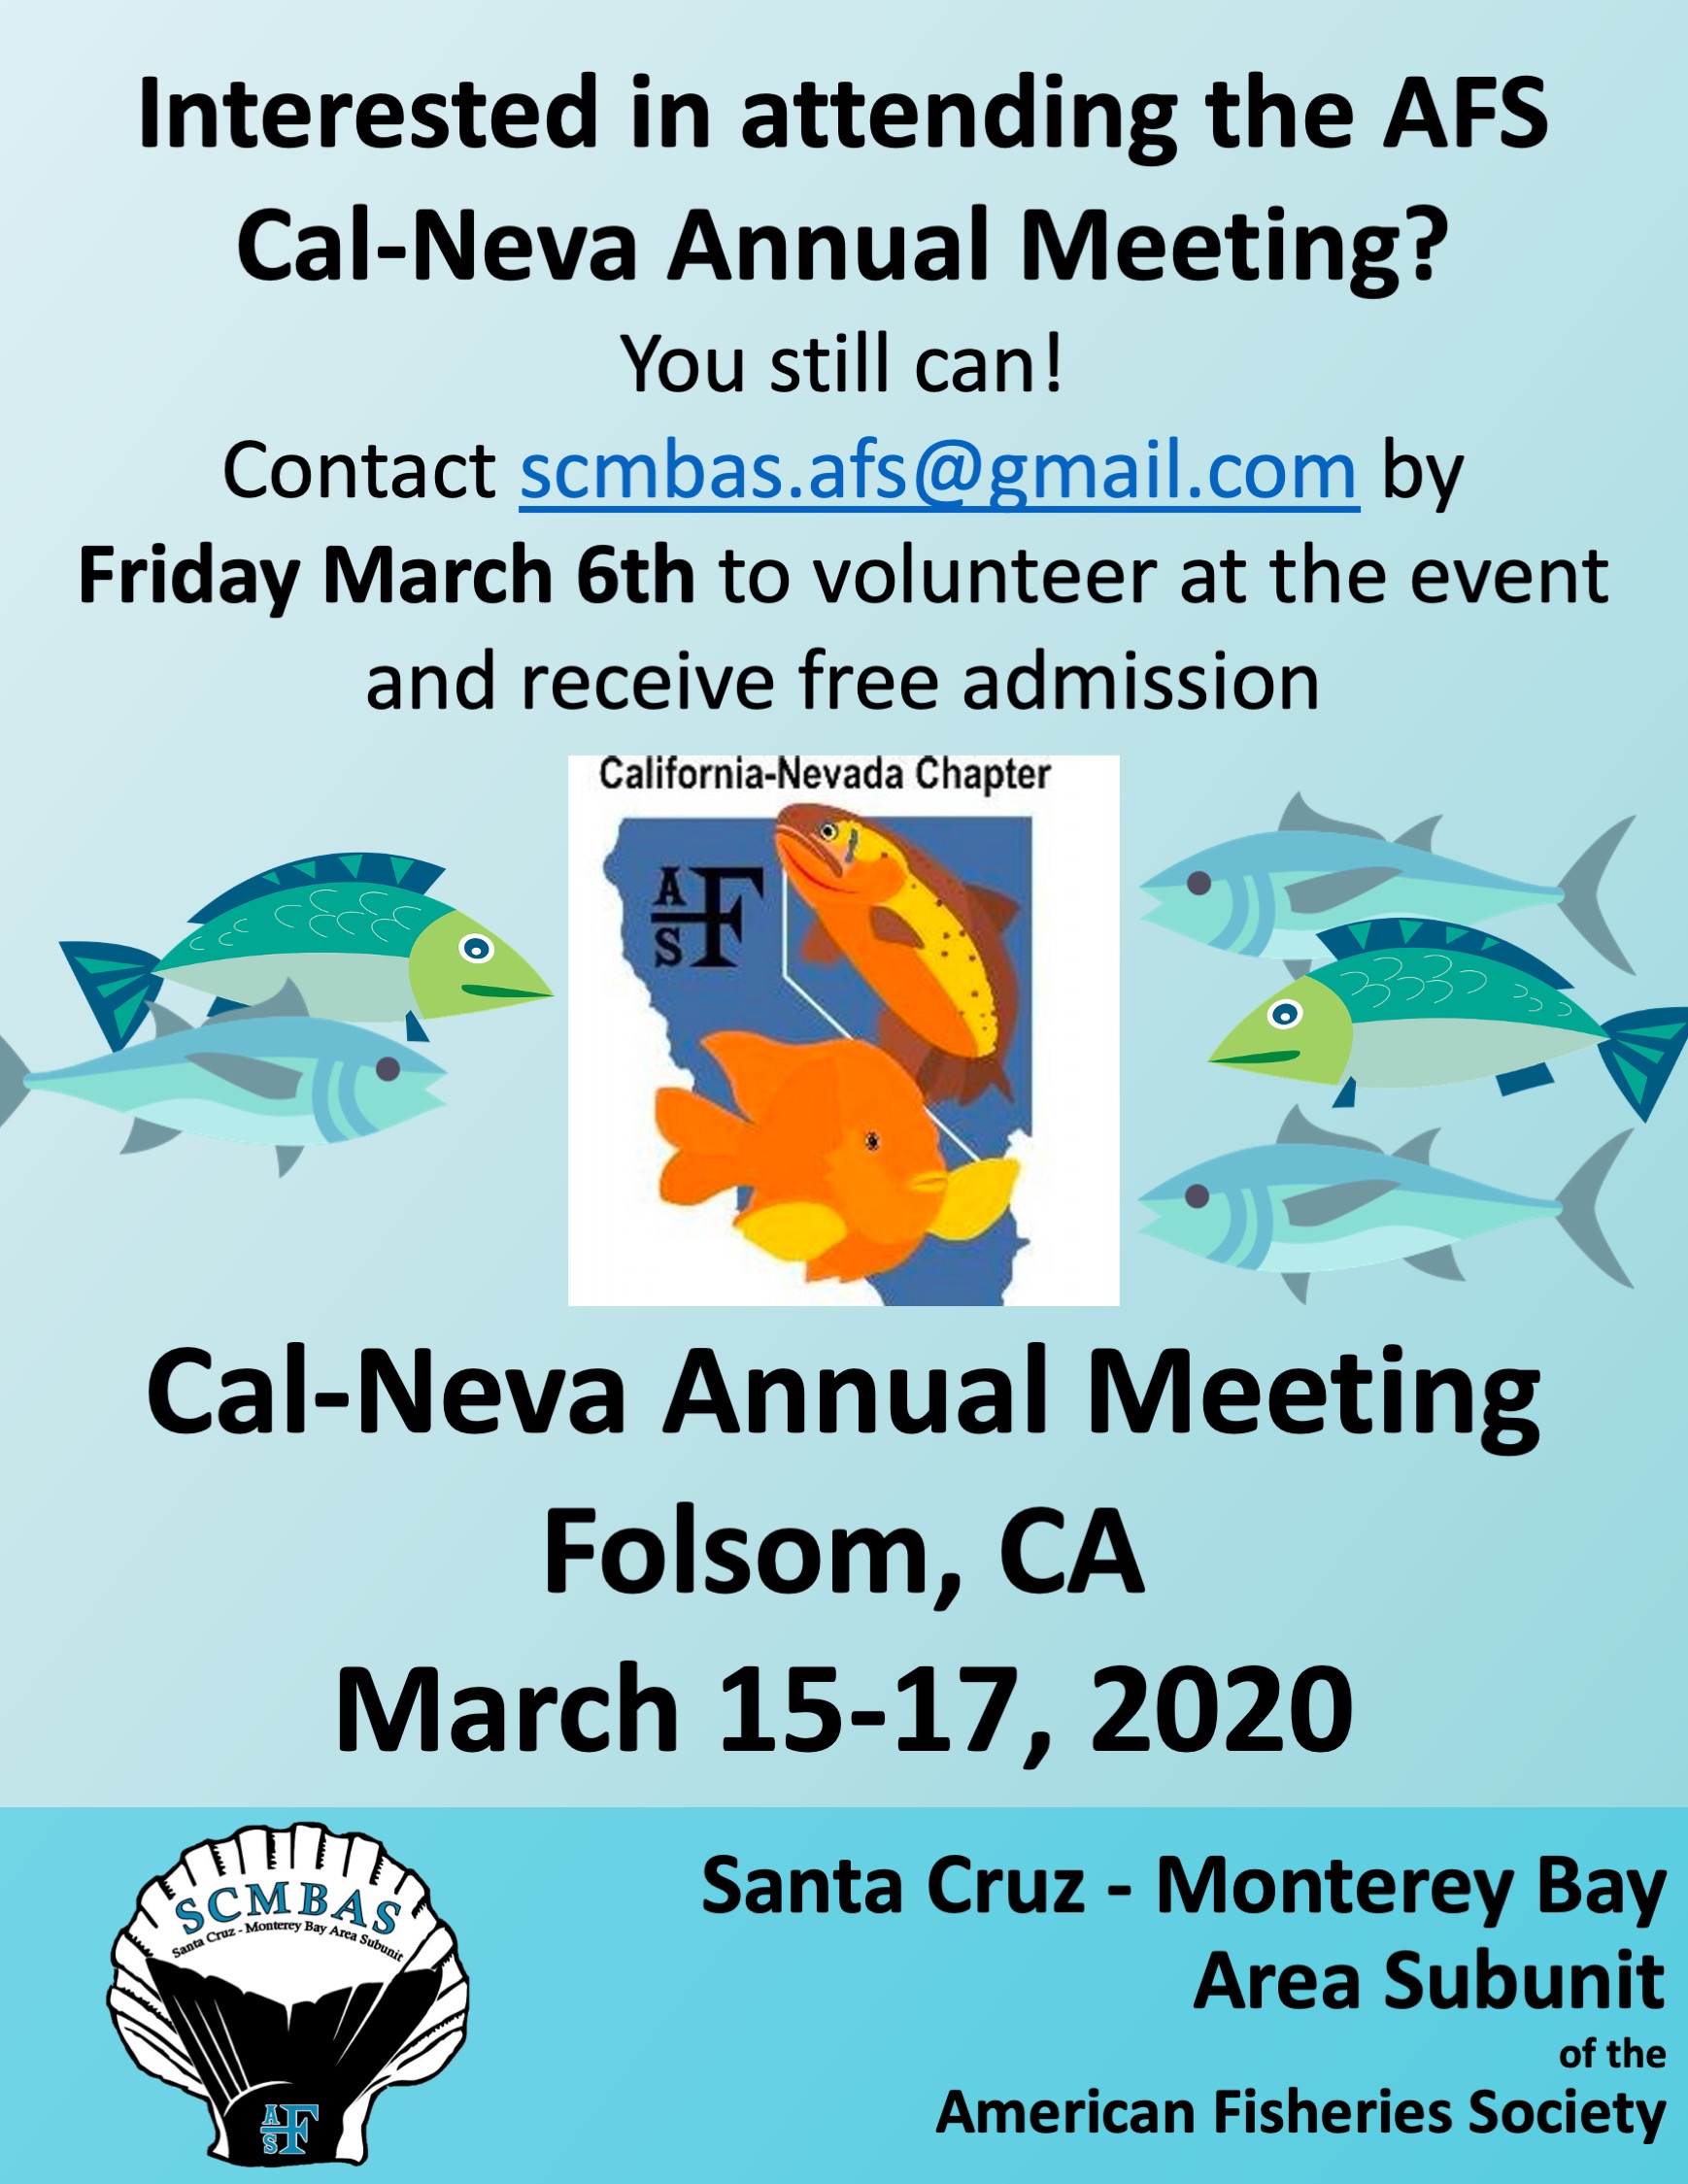 Do you want to attend the 2020 Cal-Neva Meeting? Contact us by Friday March 6th!